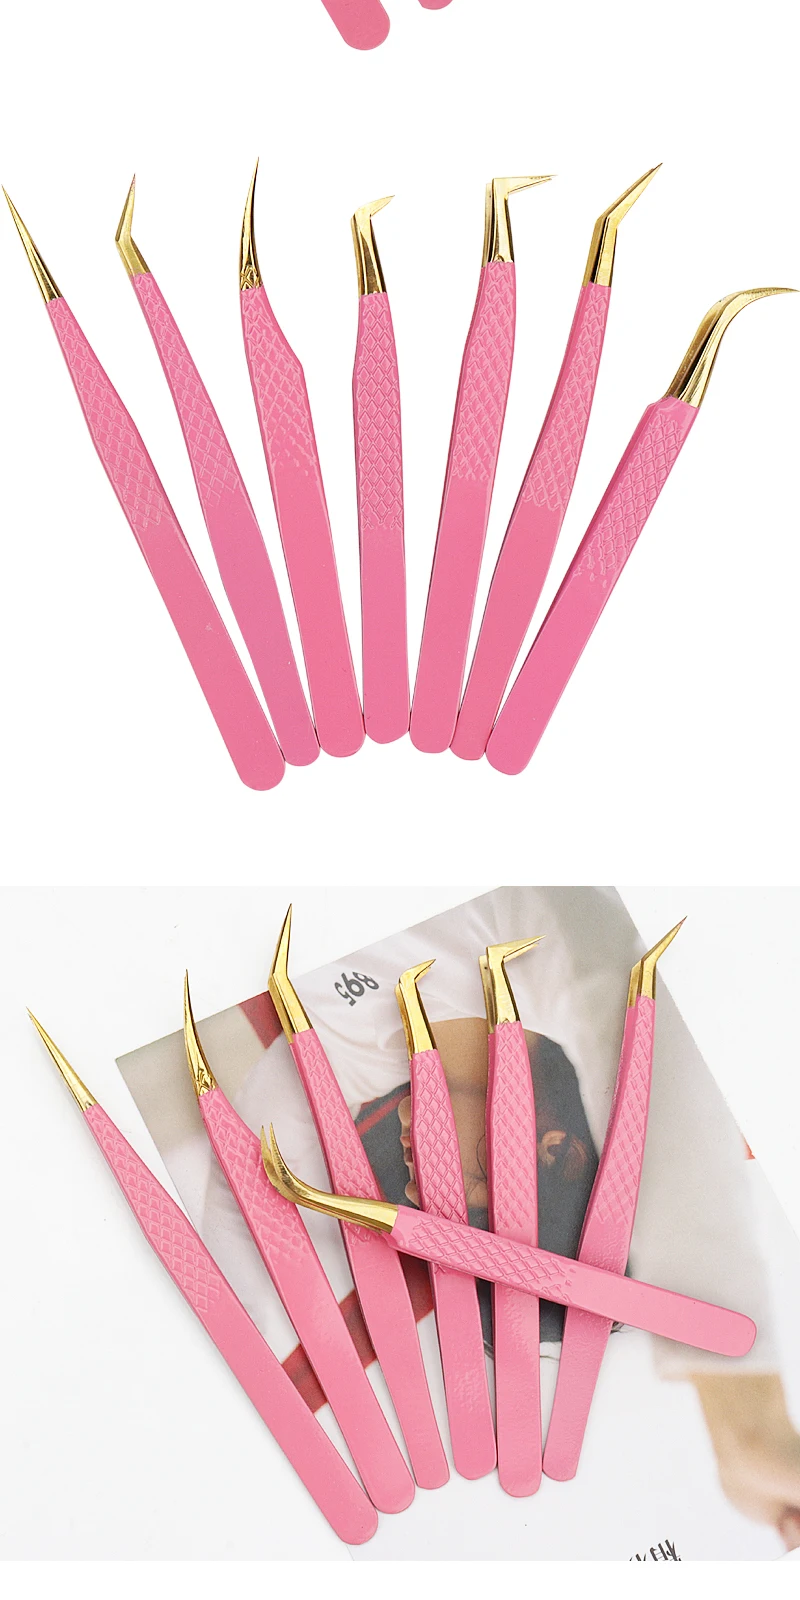 S26d2c44e04cc438287a87f04a73cda8cd 1Pc Eyelash Tweezers Stainless Steel Anti-static Non-magnetic Professional Pincet 3D Lashes Extension Tweezer Makeup Tools